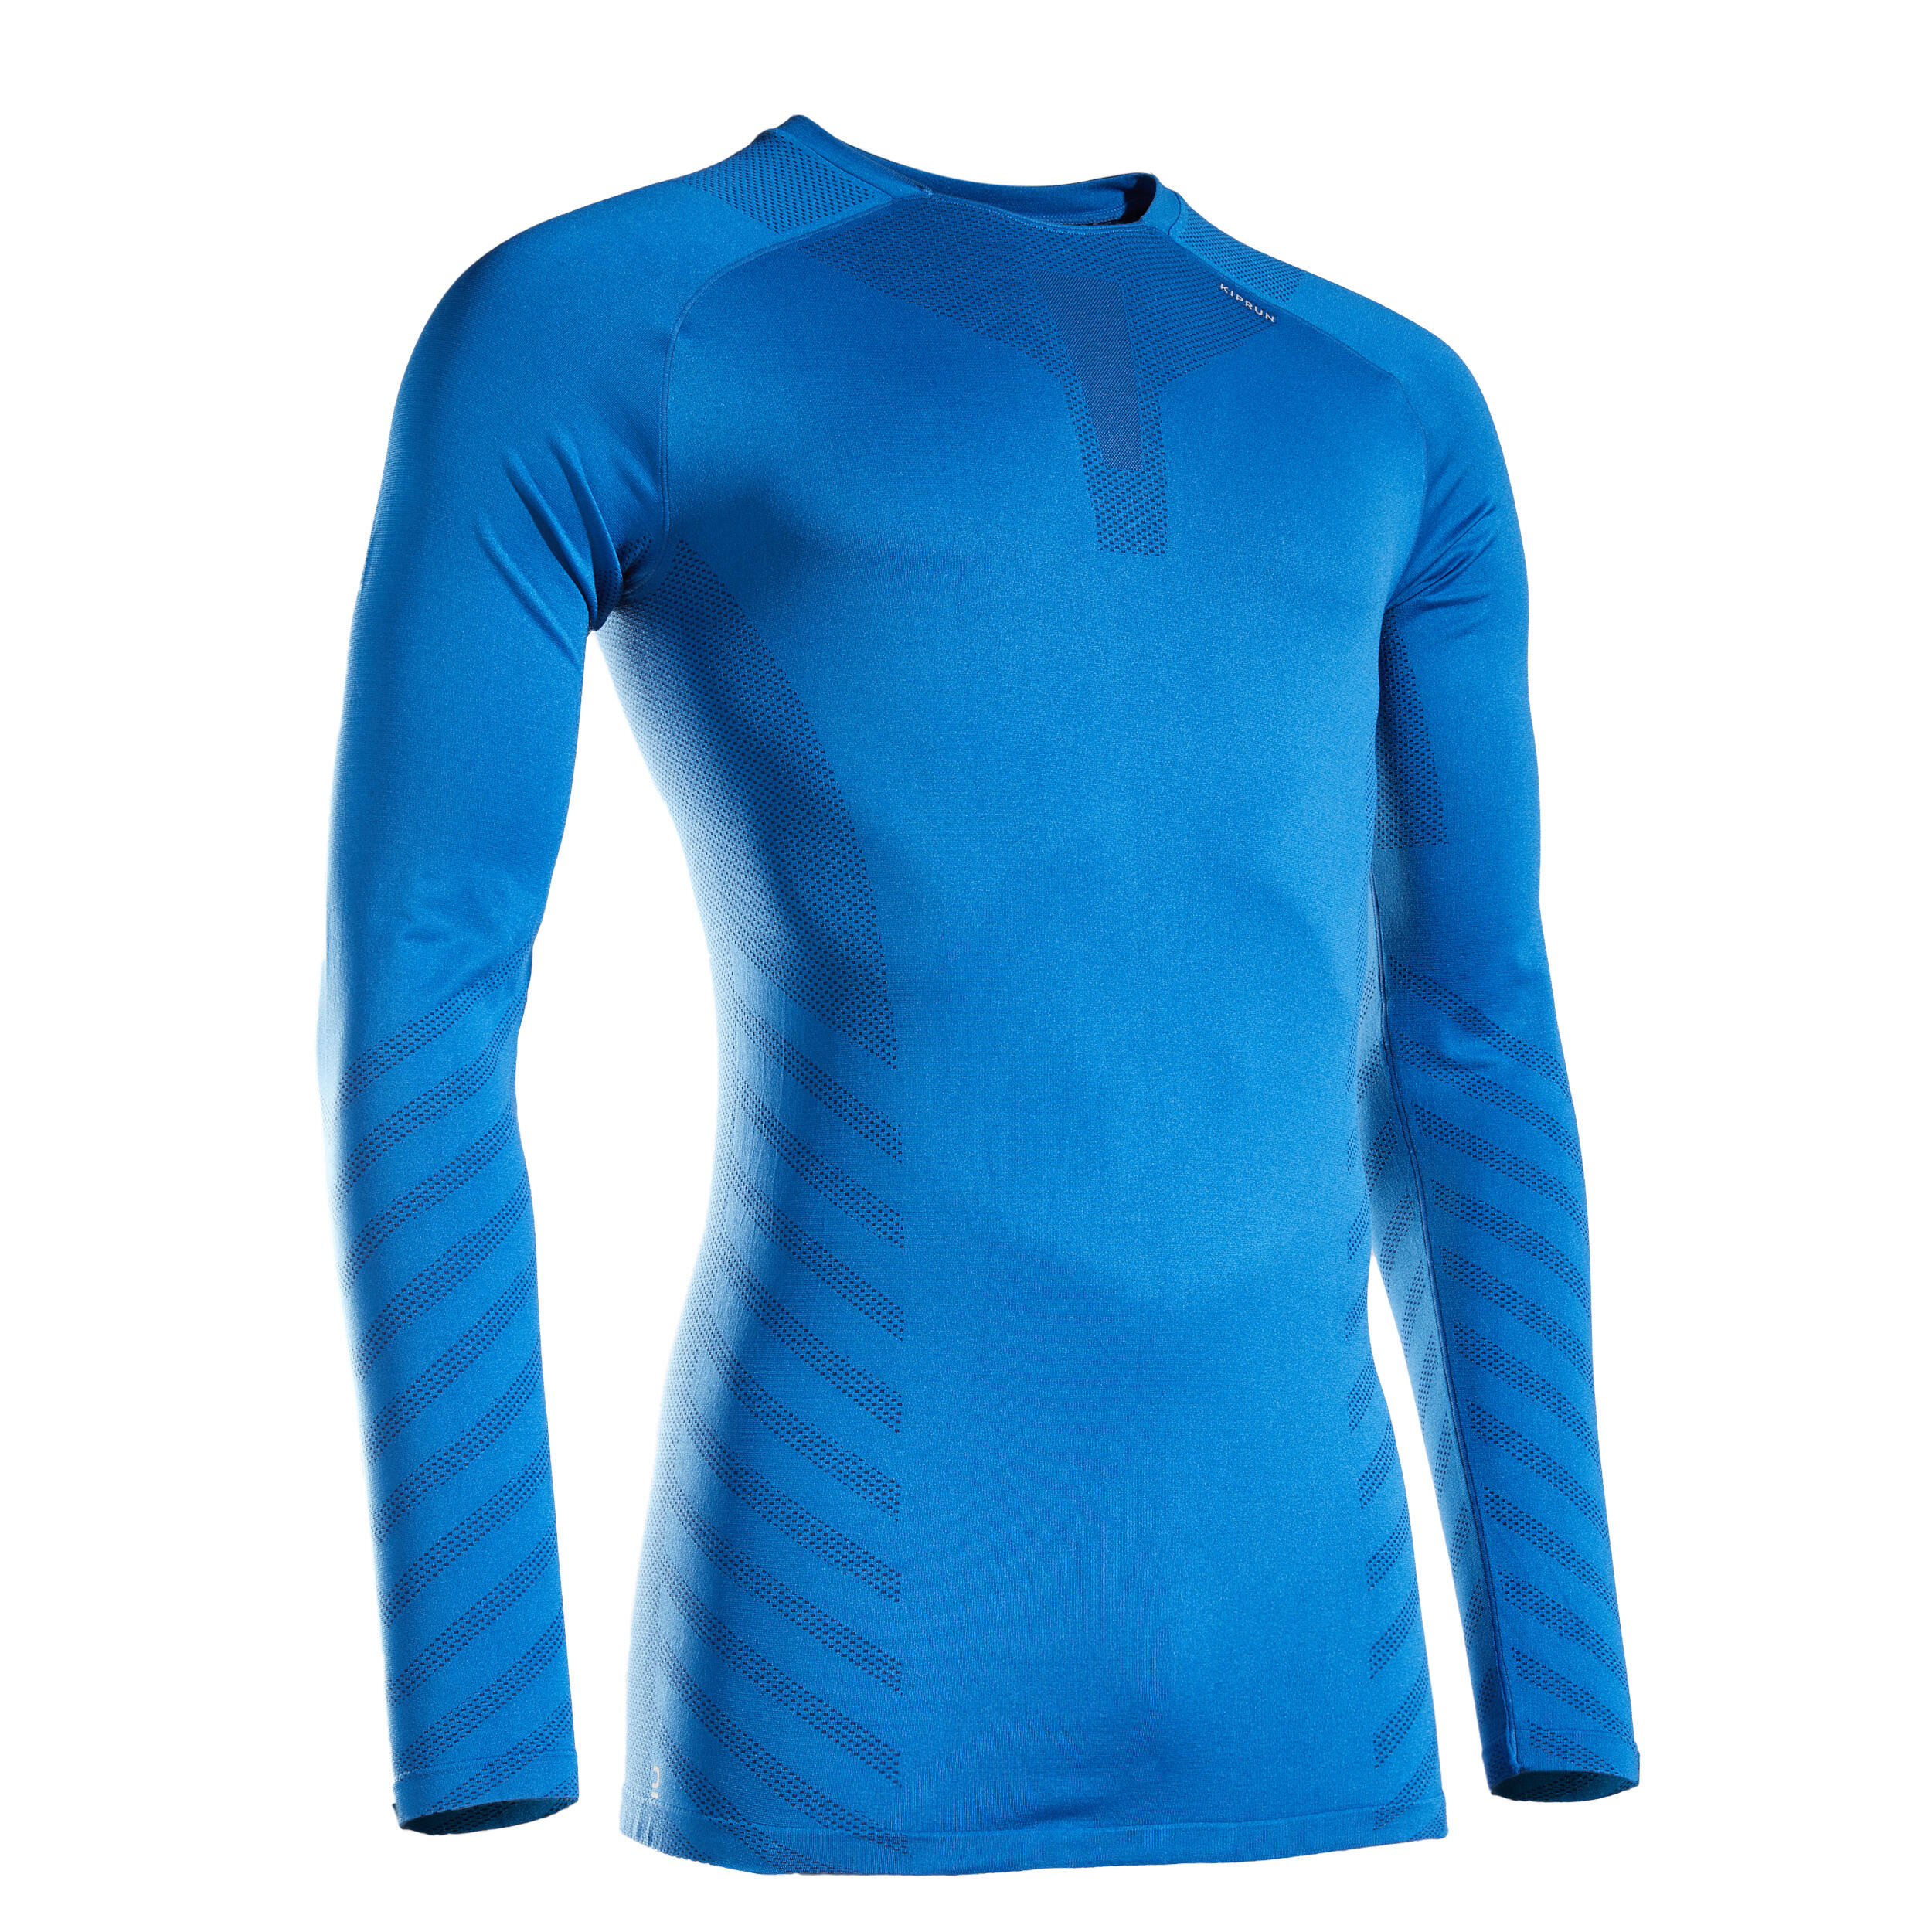 SKINCARE MEN'S LONG-SLEEVED WINTER RUNNING T-SHIRT - LIMITED EDITION 6/6